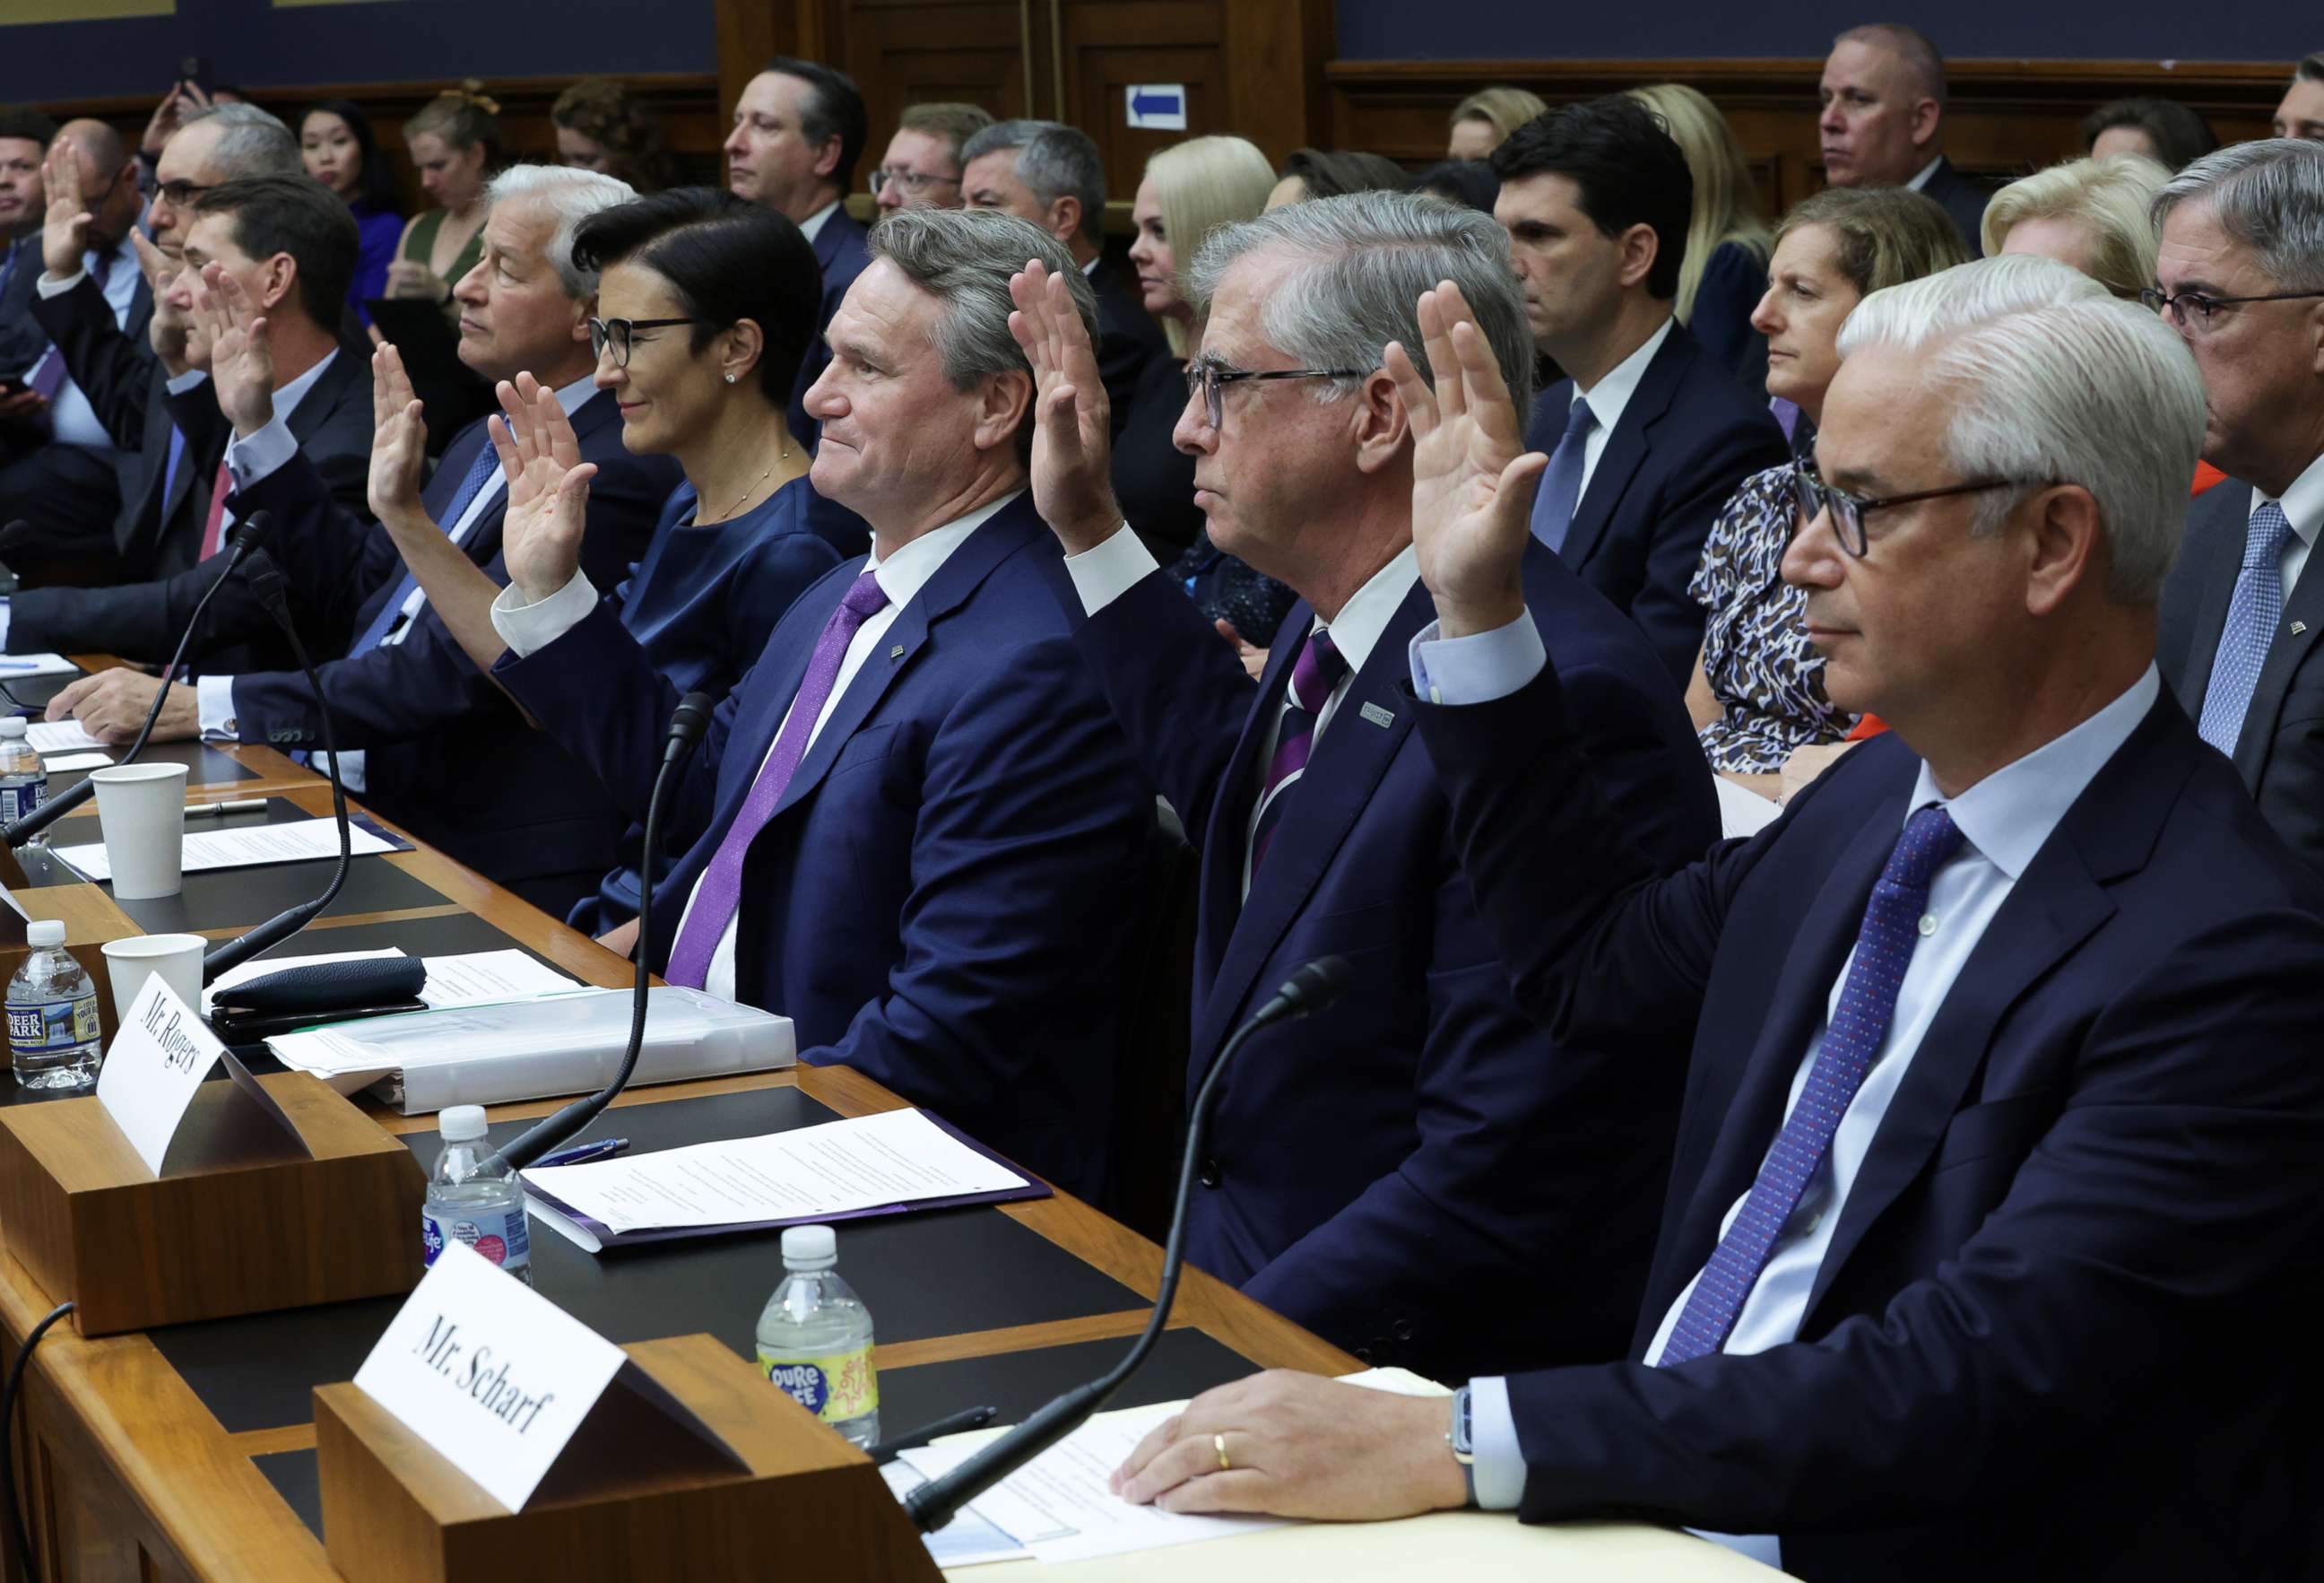 PHOTO: Big bank CEOs are sworn in during a hearing before the House Committee on Financial Services at Rayburn House Office Building on Capitol Hill, on Sept. 21, 2022, in Washington, D.C.